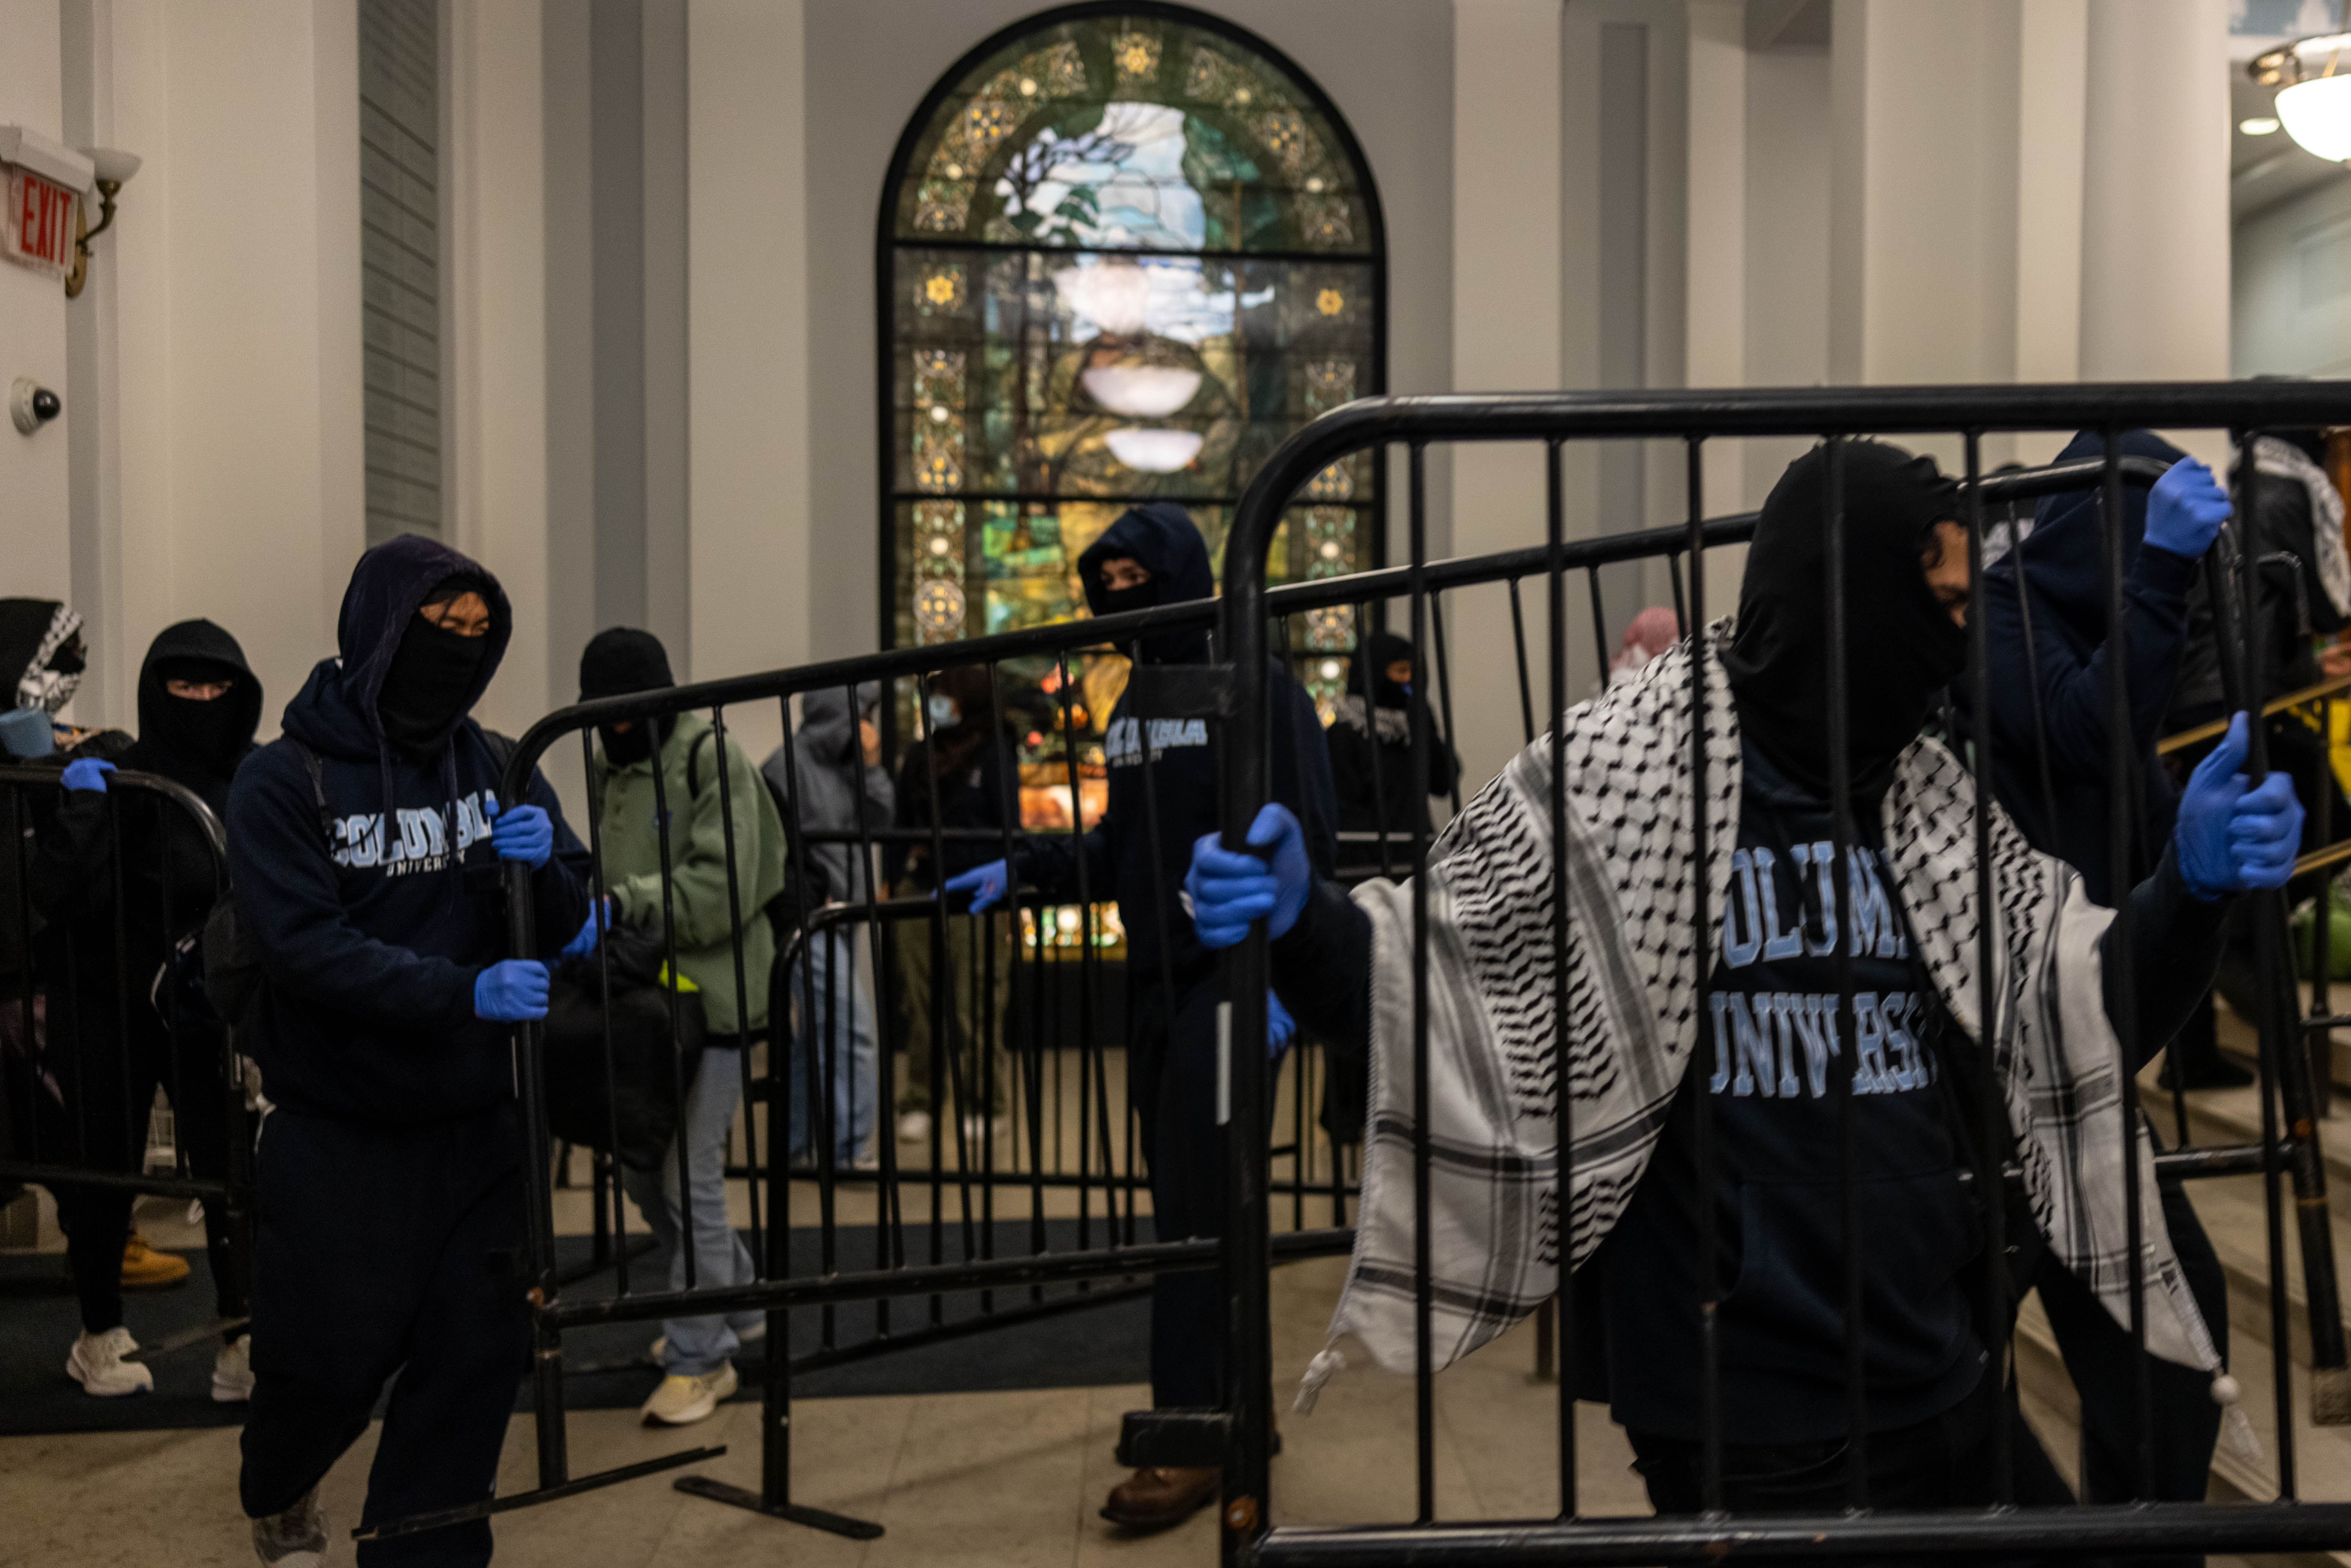 Demonstrators supporting Palestinians in Gaza barricade themselves inside Hamilton Hall, an academic building which has been occupied in past student movements, on April 30, 2024 in New York City